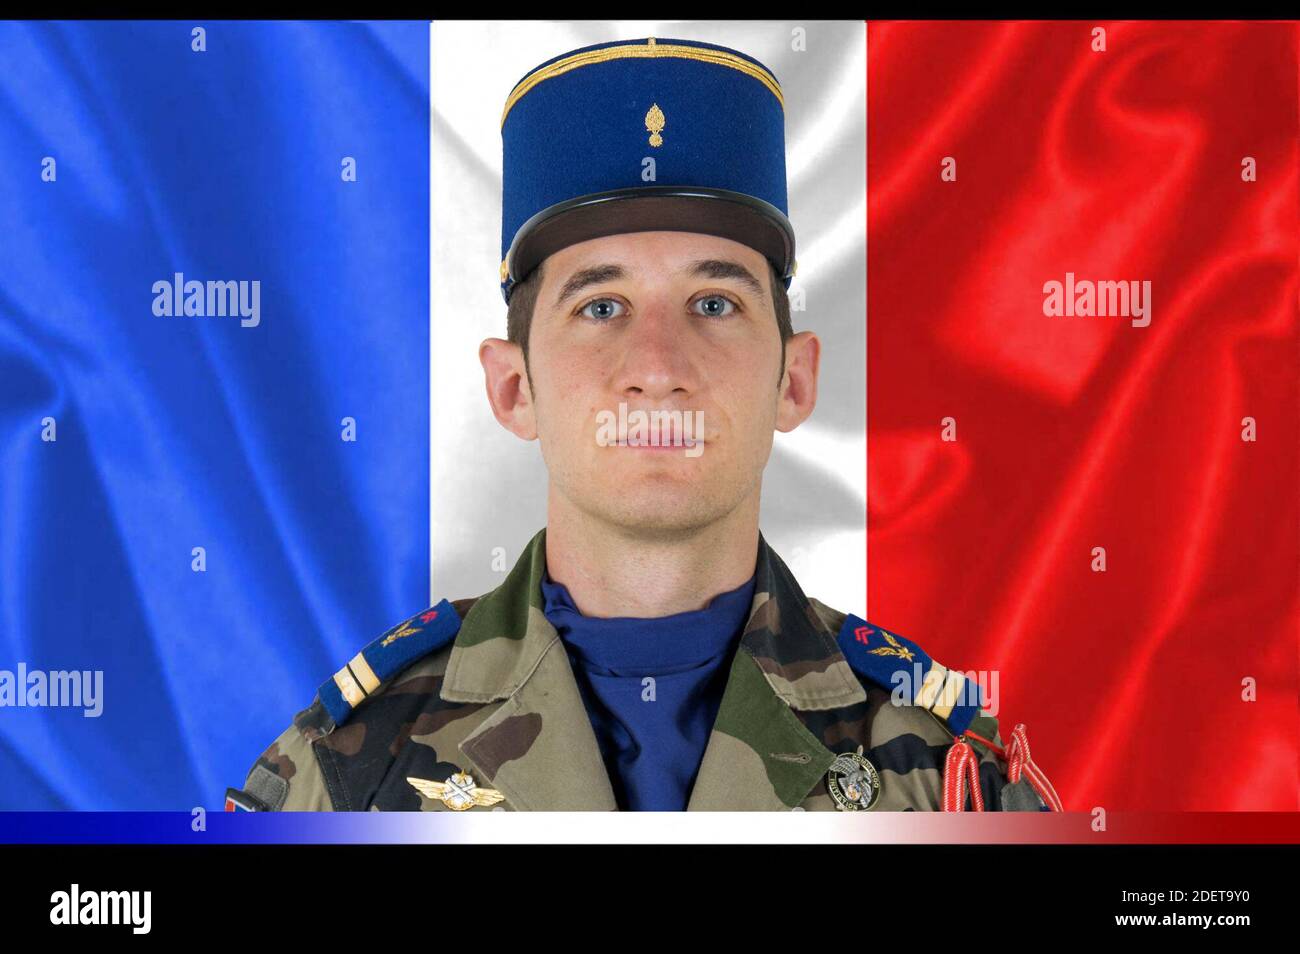 Lieutenant Alex Morisse of the 13 French soldiers of the Operation Barkhane killed on November 25, 2019 in a helicopter collision in Mali. Thirteen French soldiers were killed in Mali when two helicopters collided during an operation against insurgents in the country's restive north, officials said on November 26, 2019, the heaviest single loss for the French military in nearly four decades. Photo by SIRPA via ABACAPRESS.COM Stock Photo